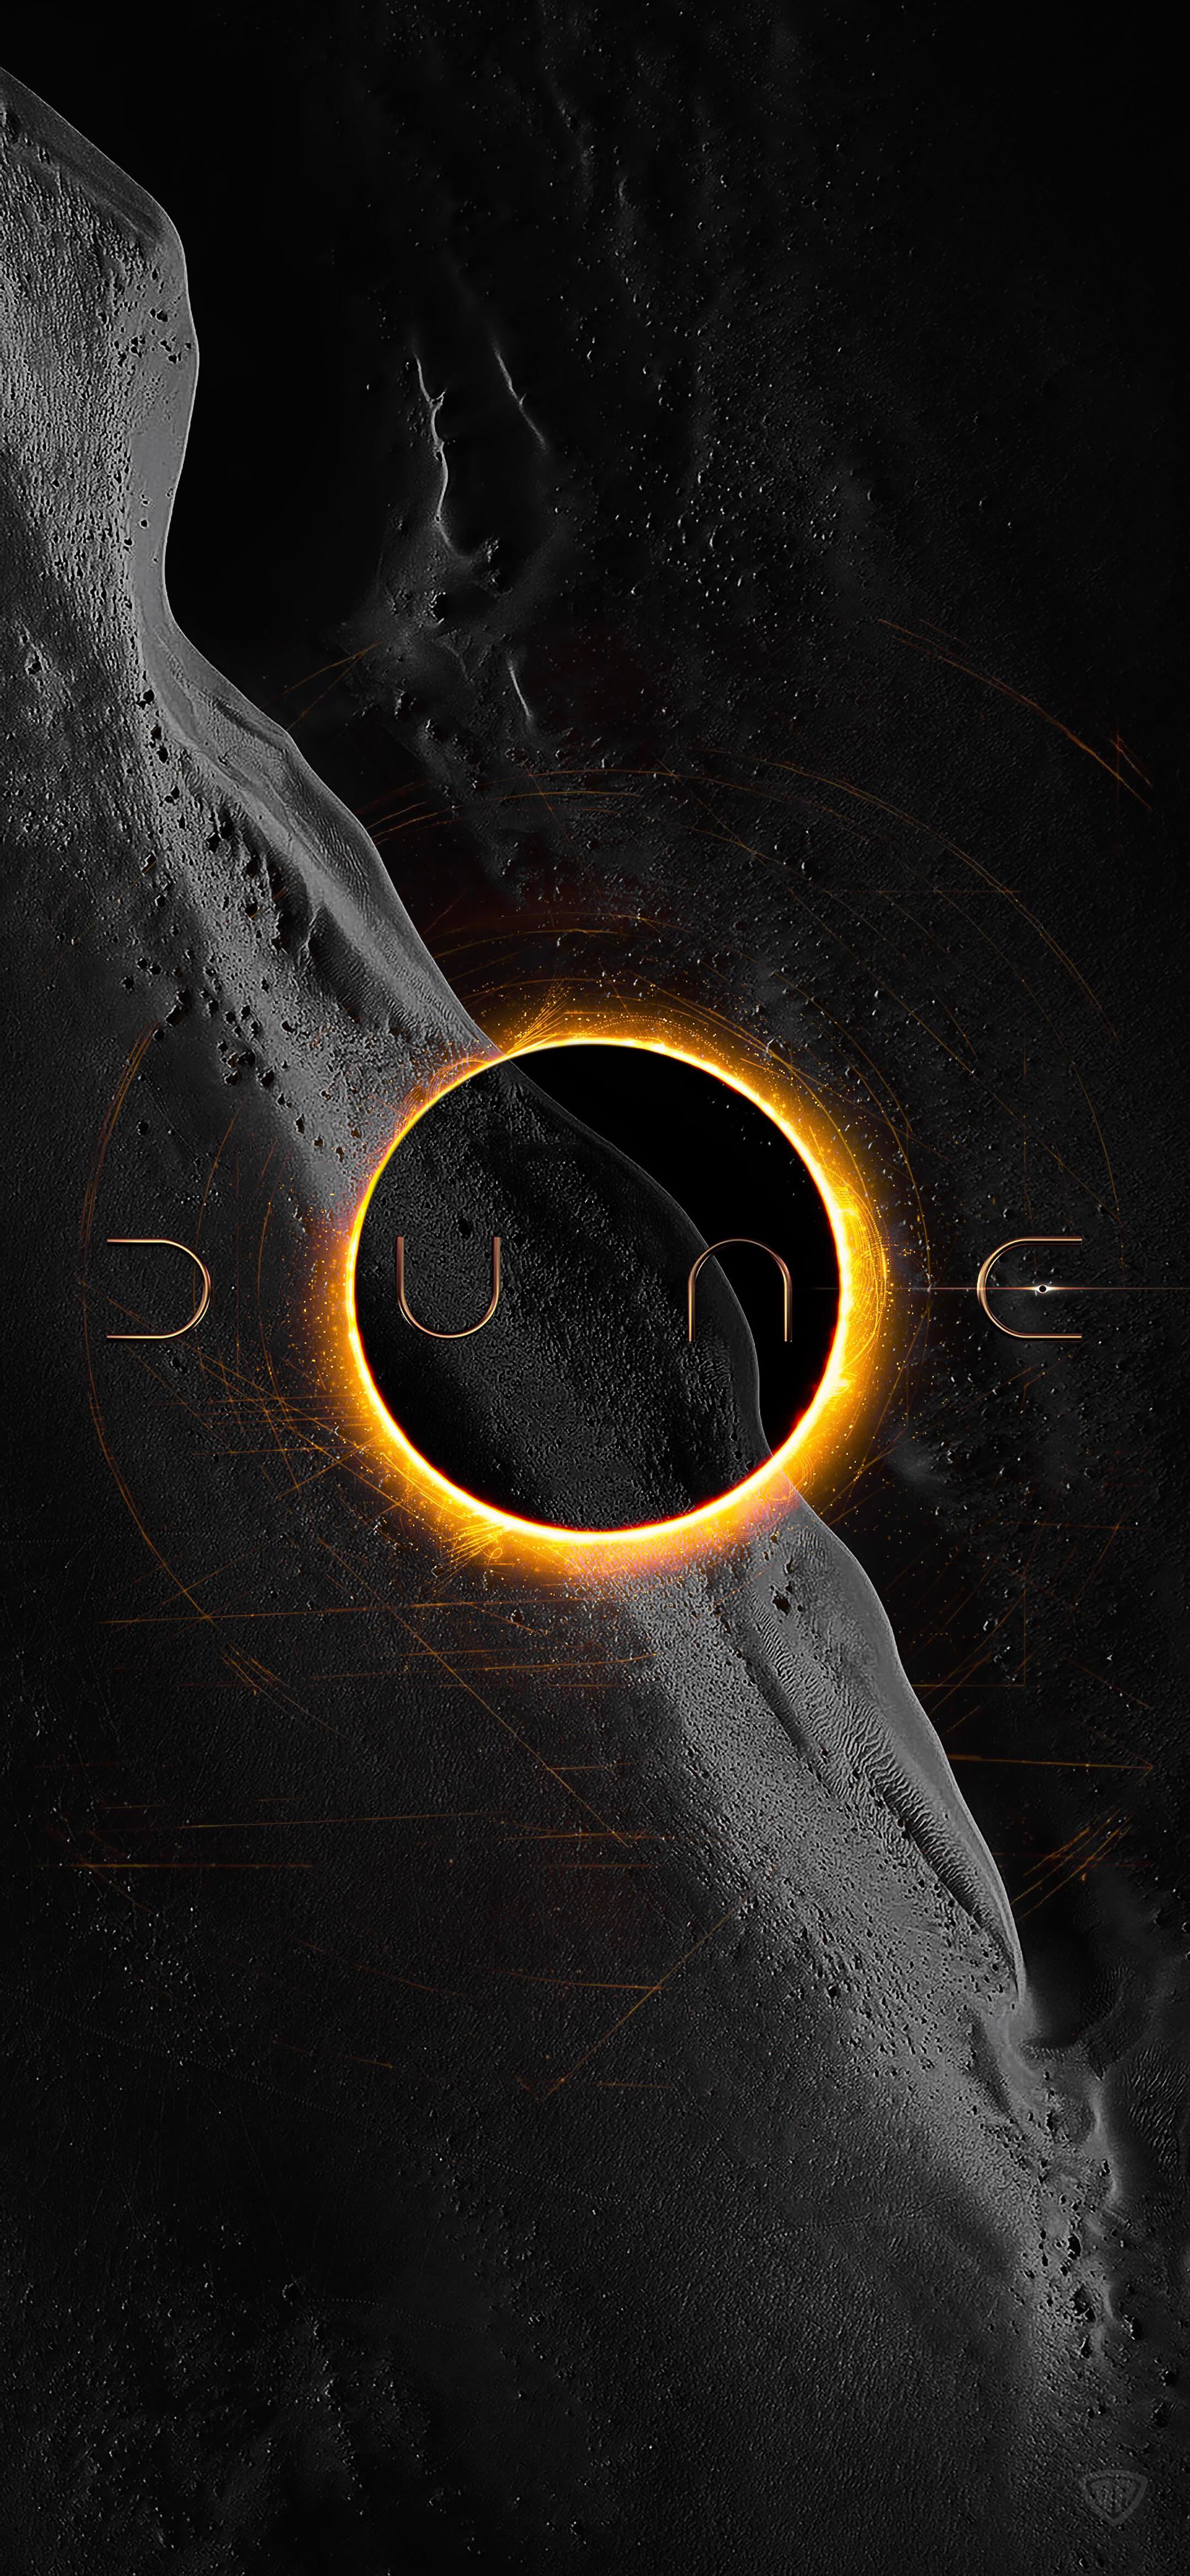 Yesterday I posted some Dune wallpaper, here are the mobile sizes. Again, feel free to use!: dune